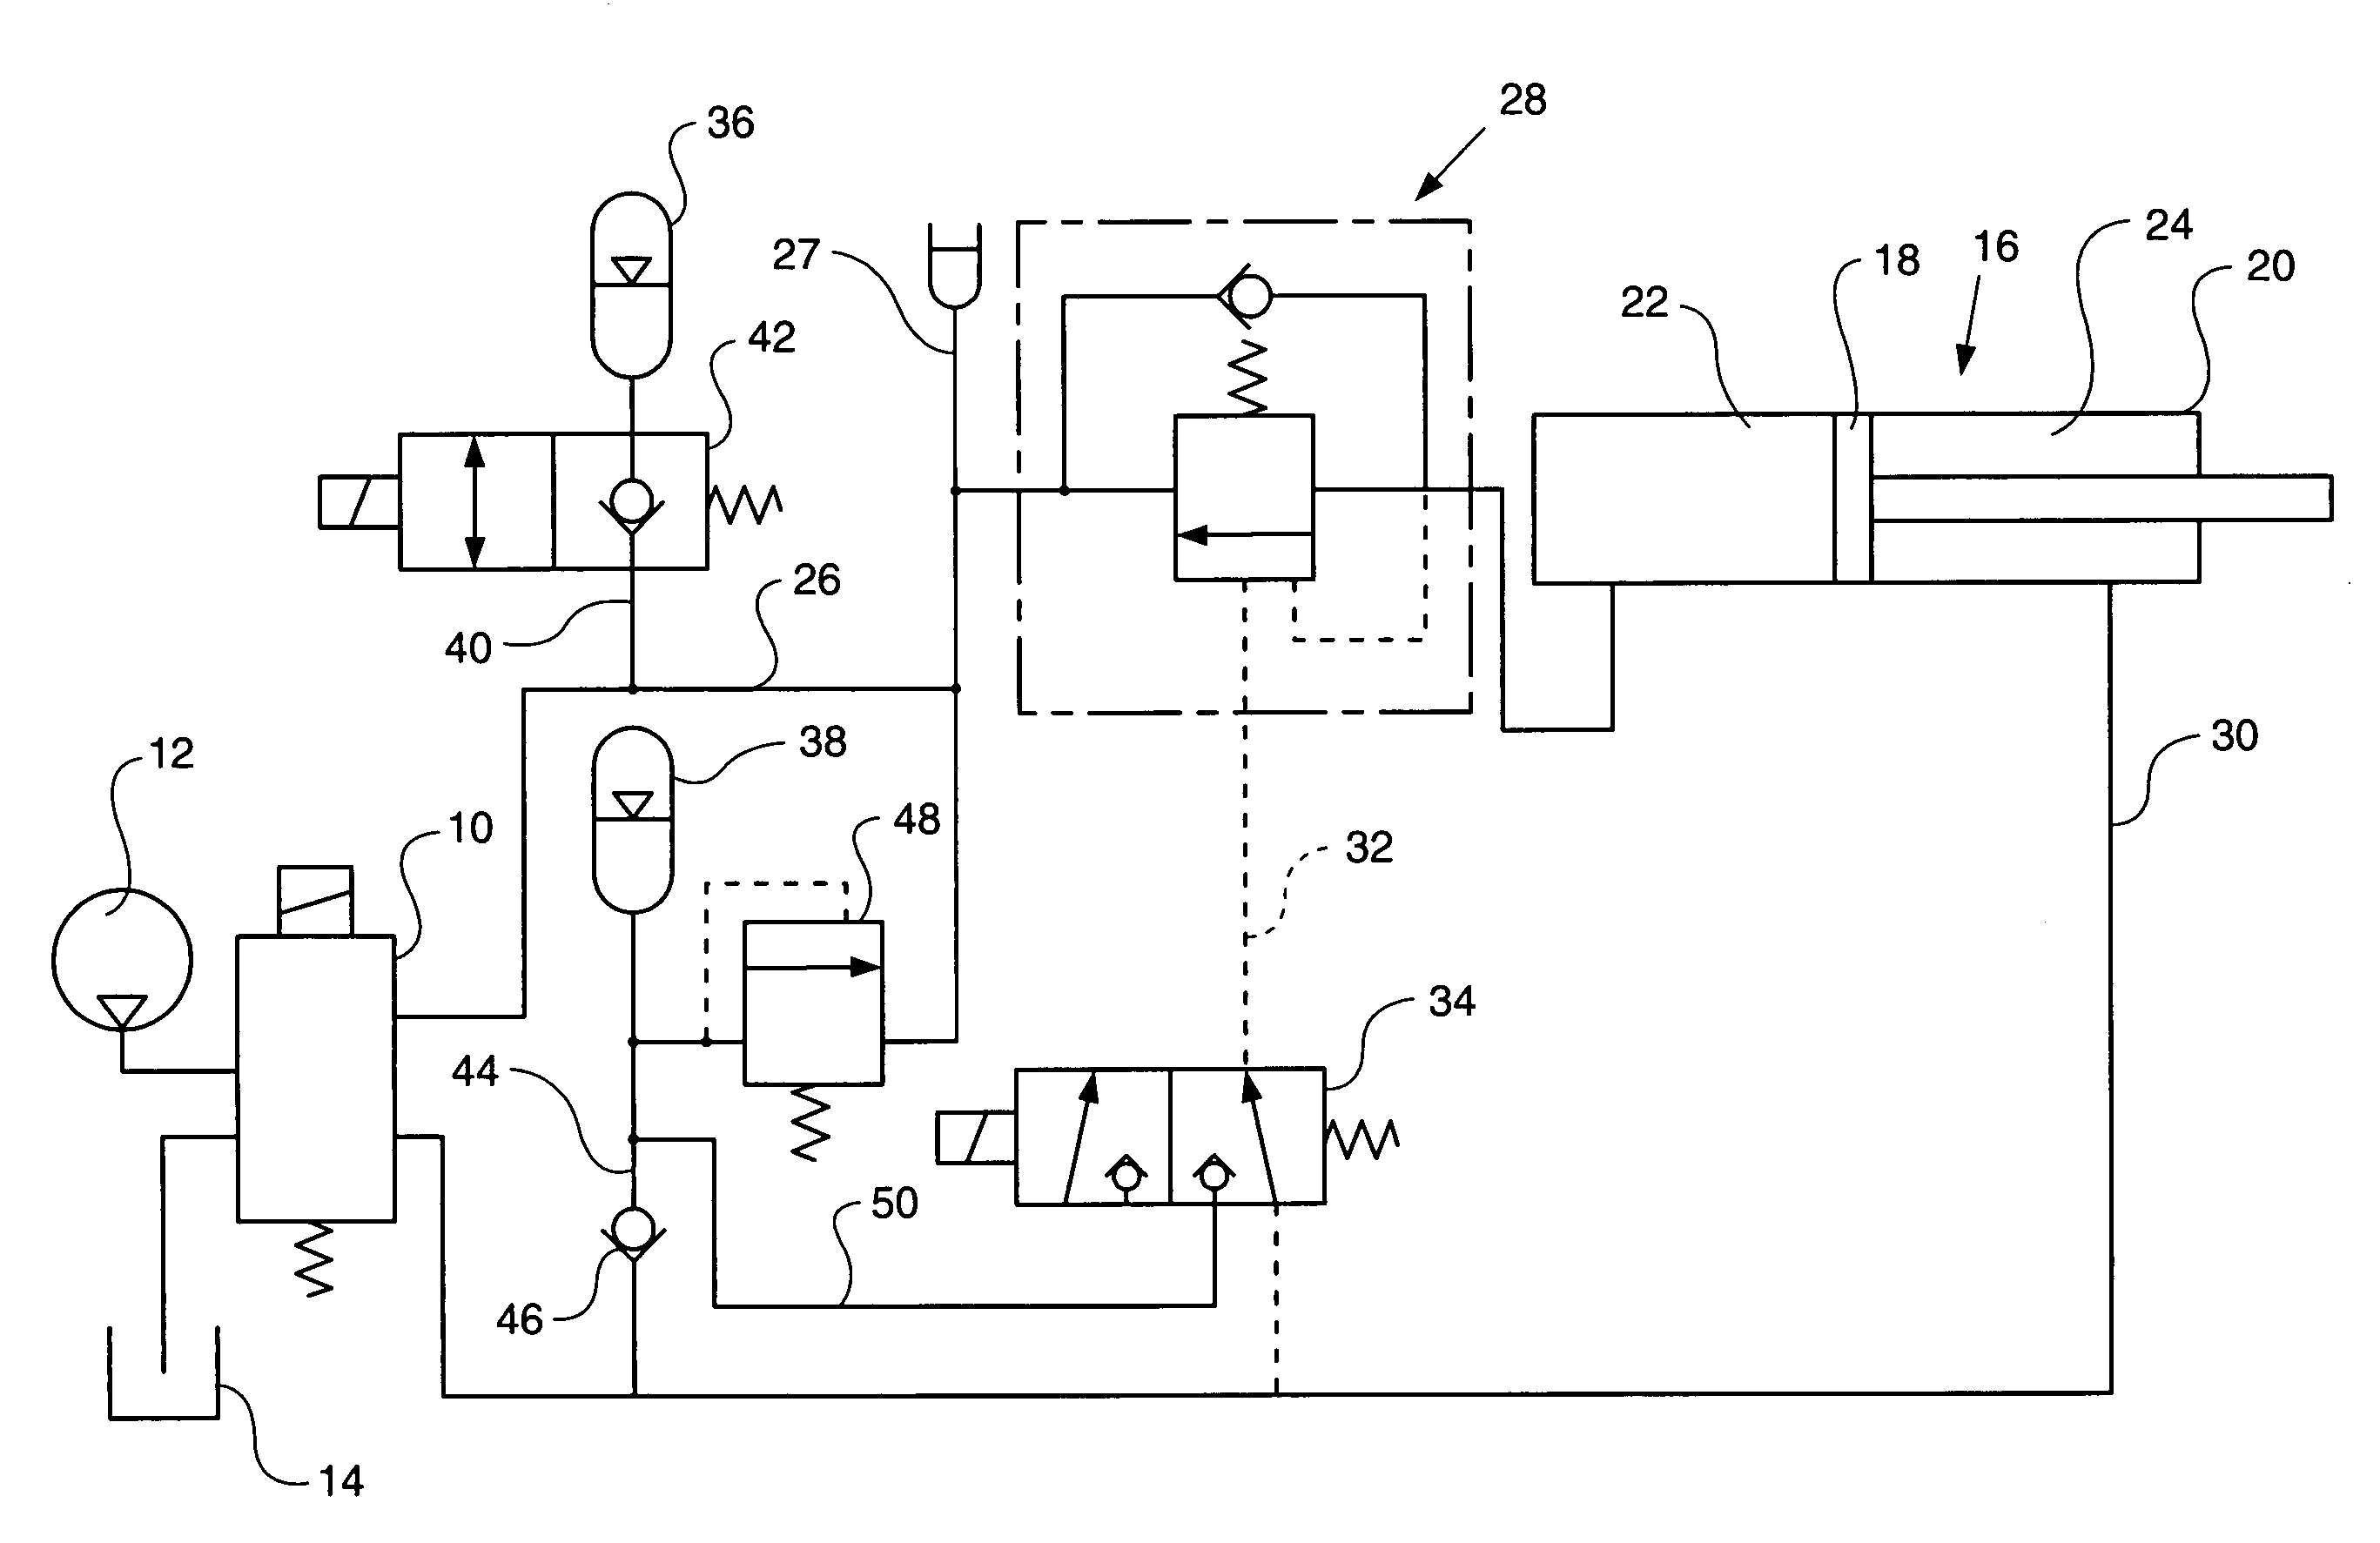 Ride control circuit for a work machine